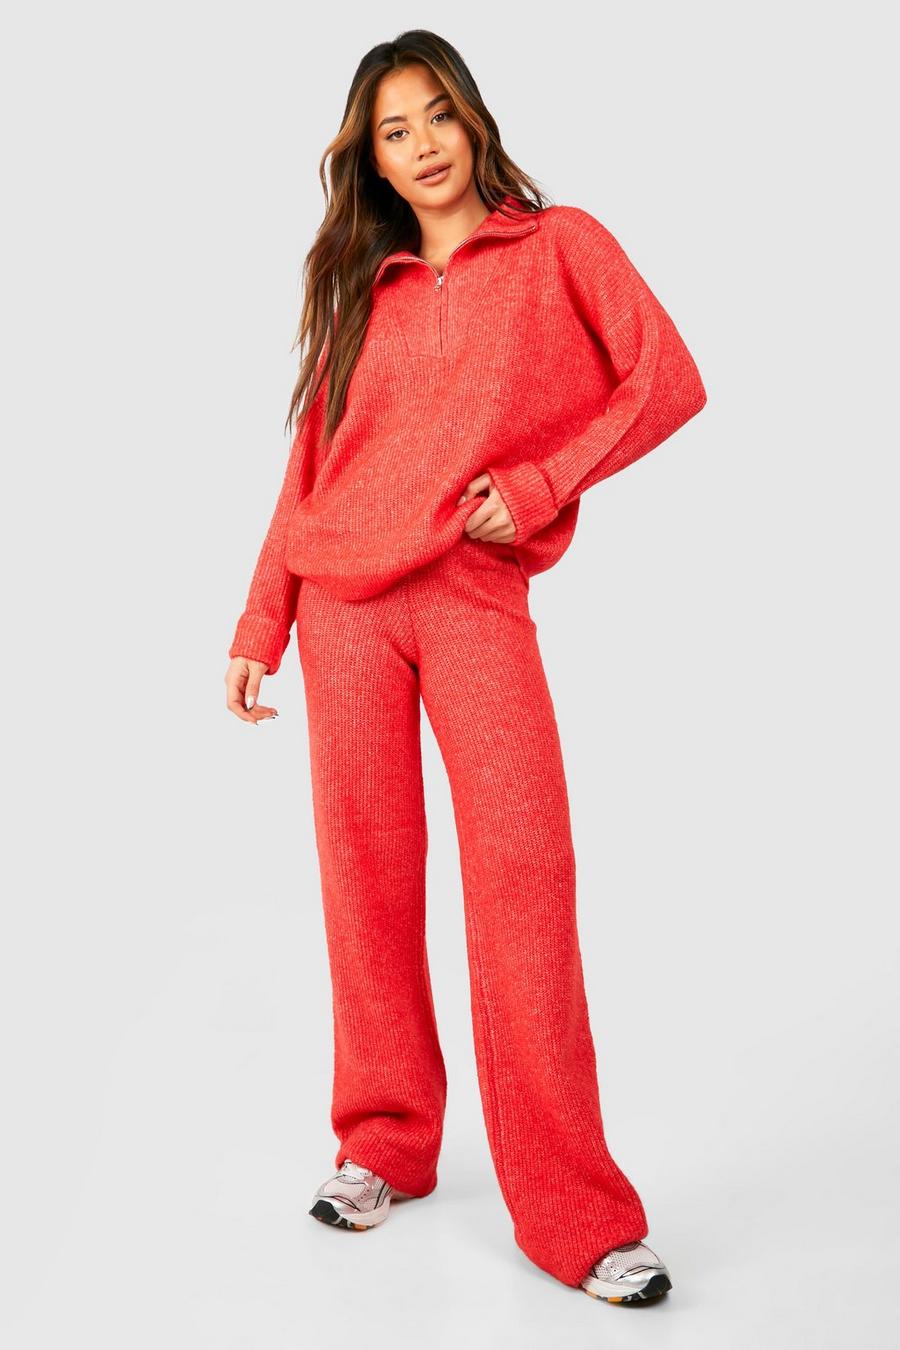 Tomato Half Zip Funnel Neck And Wide Leg Pants Knitted Set